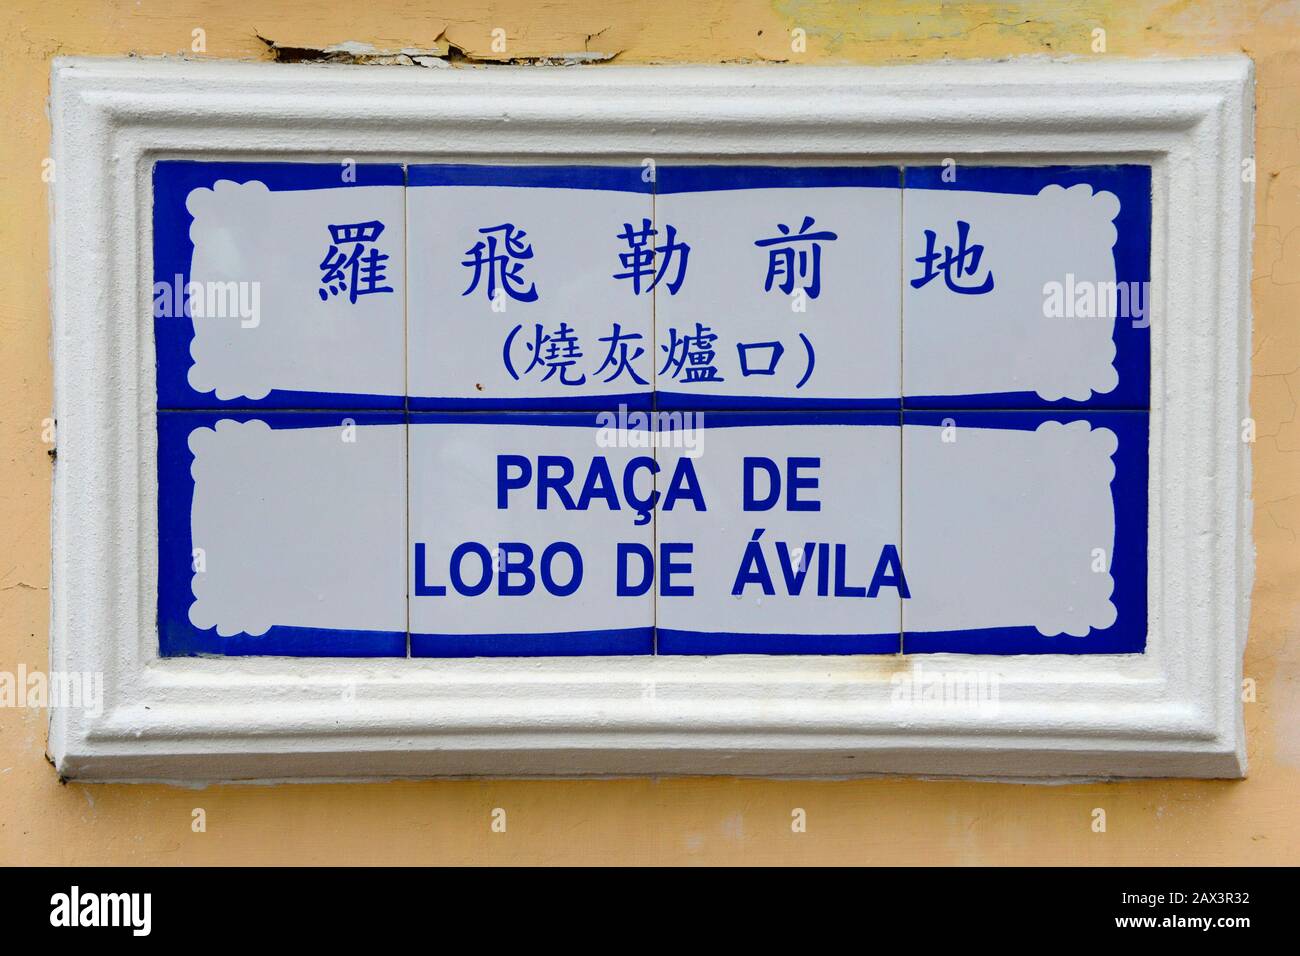 A road sign in Macau in Chinese and Portugese for the Praca de Lobo de Avila on a wall Stock Photo